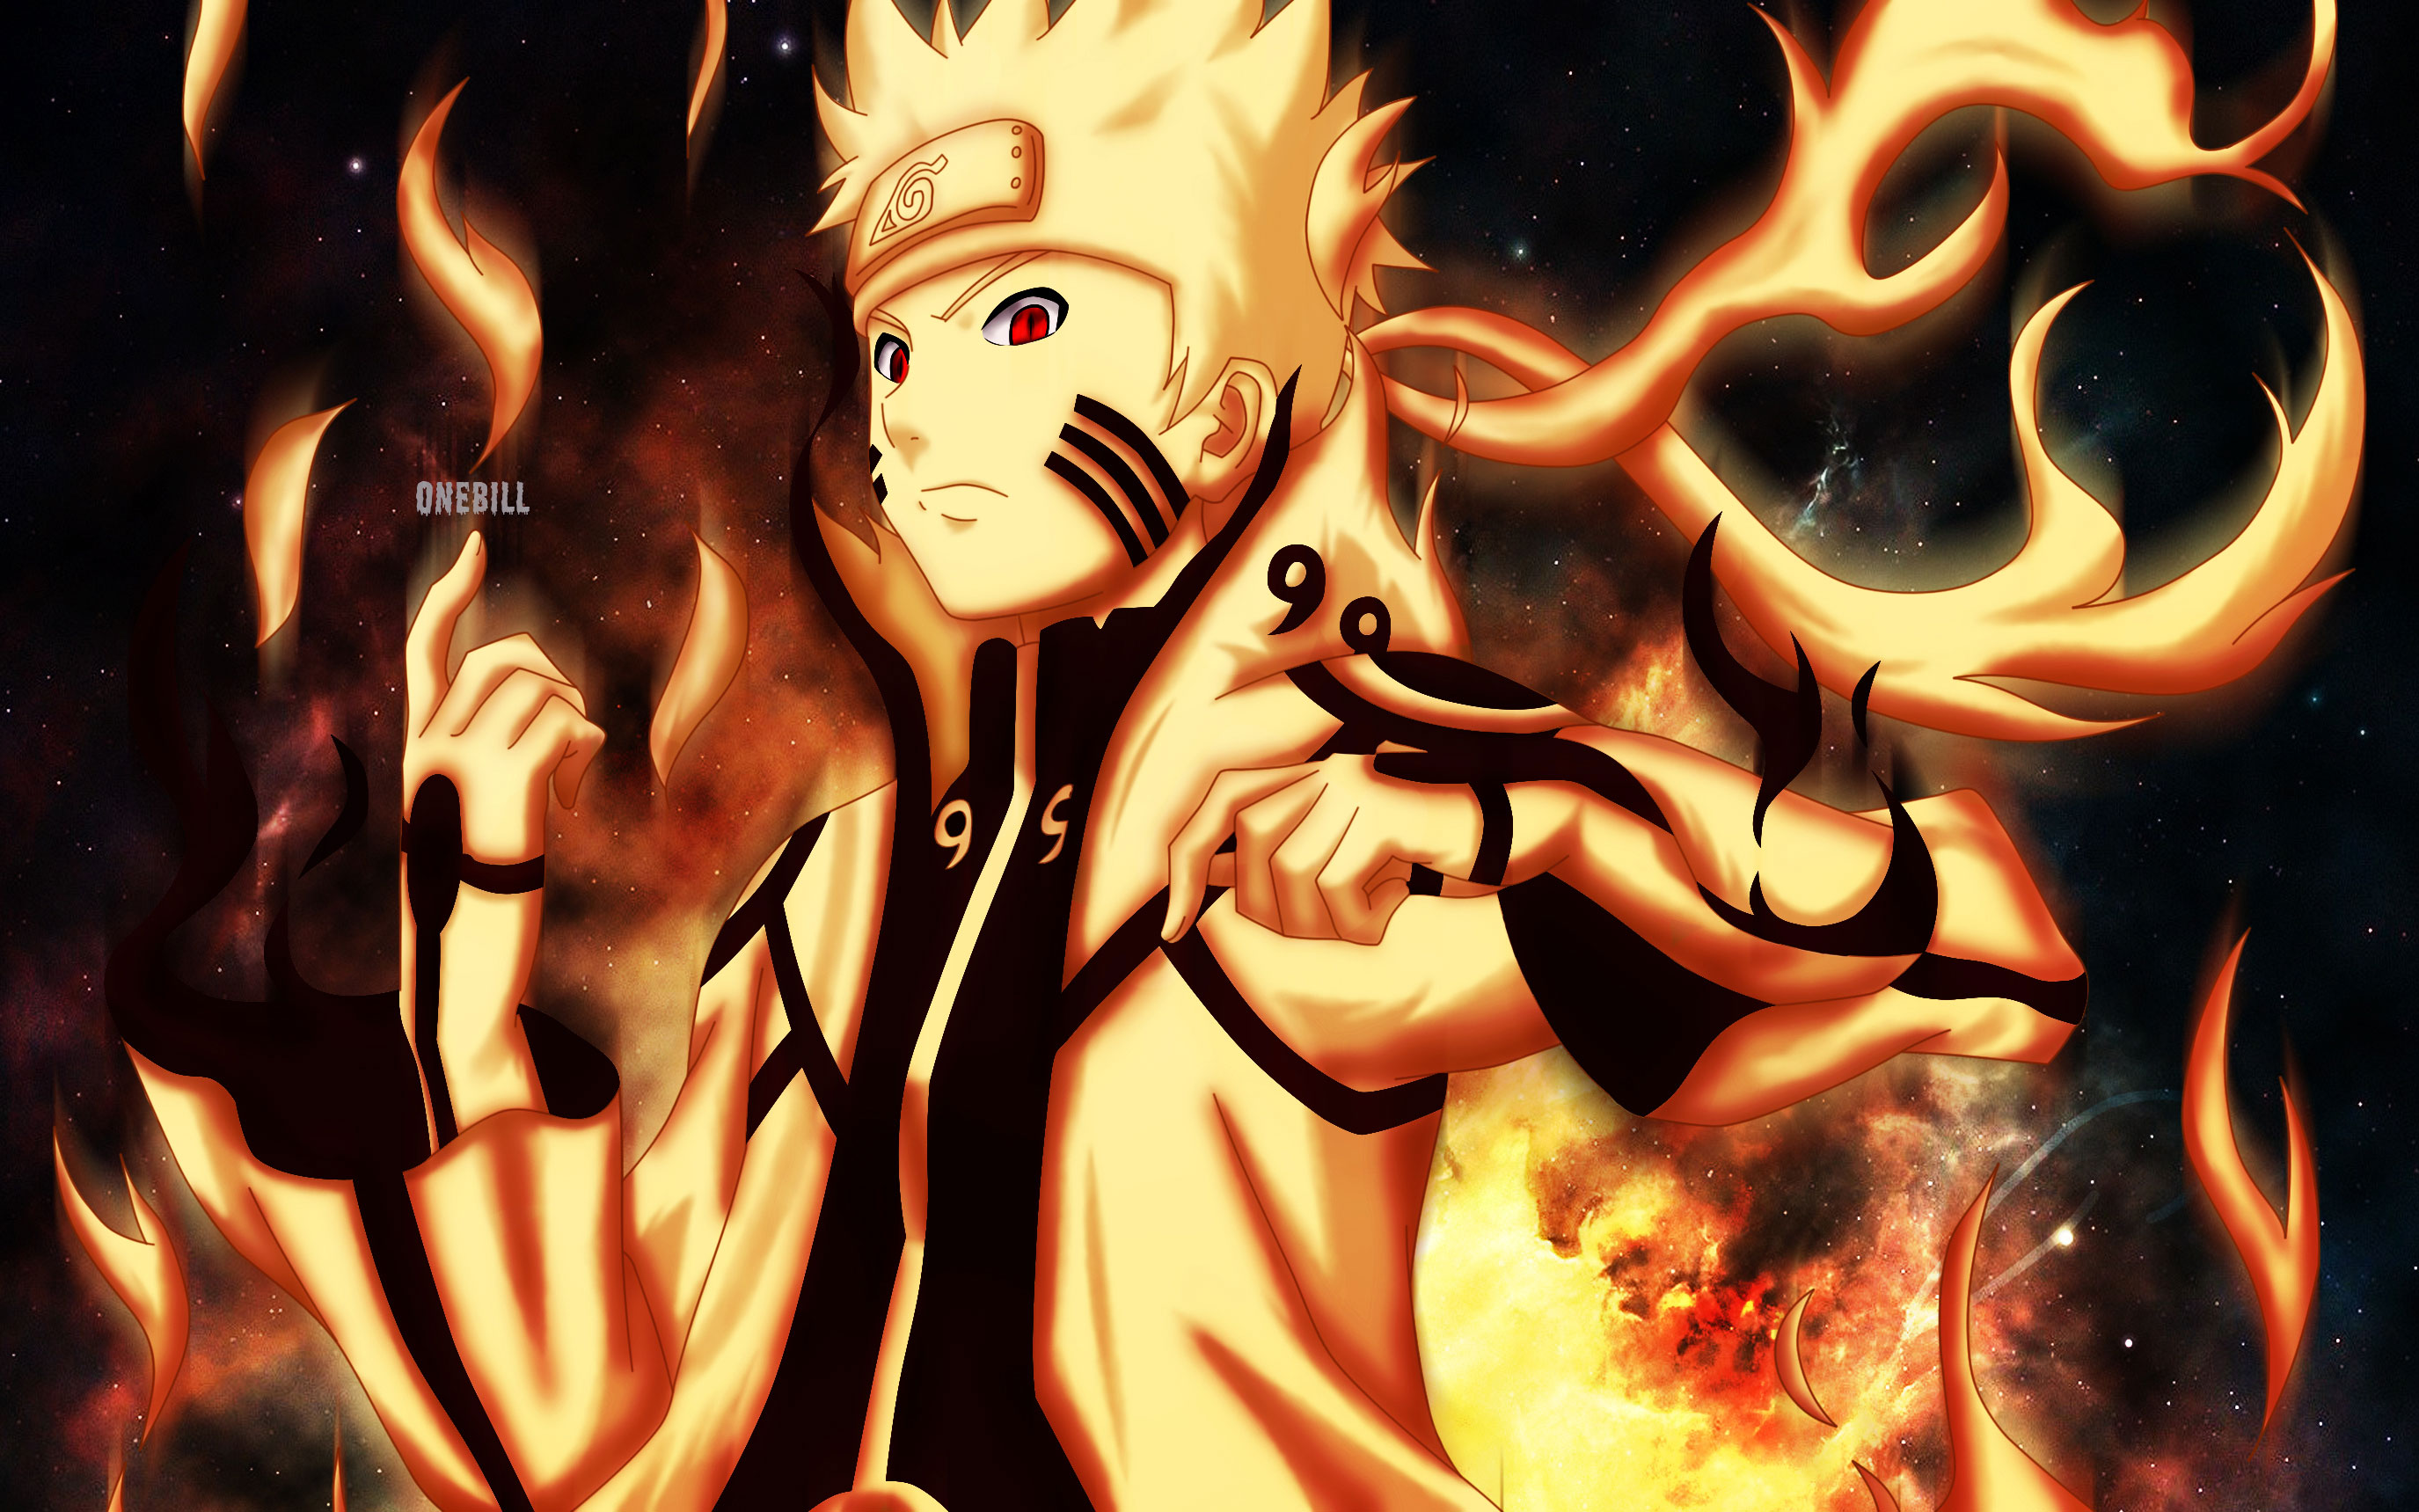 Naruto Shippuden Terbaru Wallpapers Pictures Images